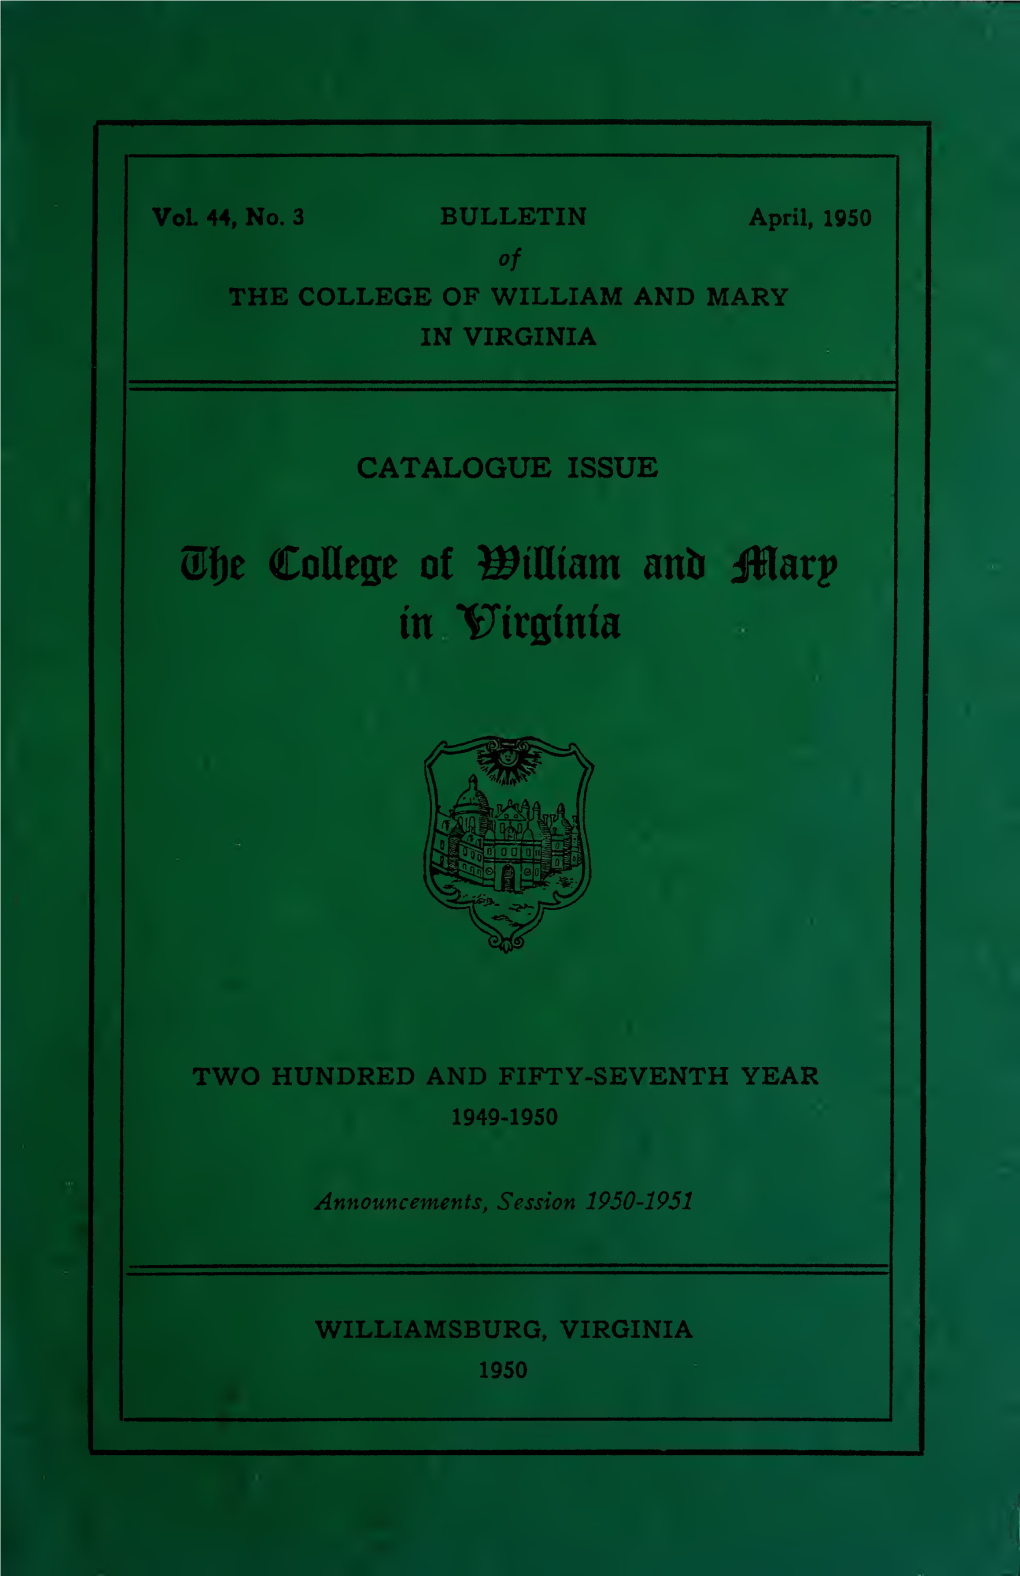 Bulletin of the College of William and Mary in Virginia, Department of Jurisprudence, Announcements, 1949-50